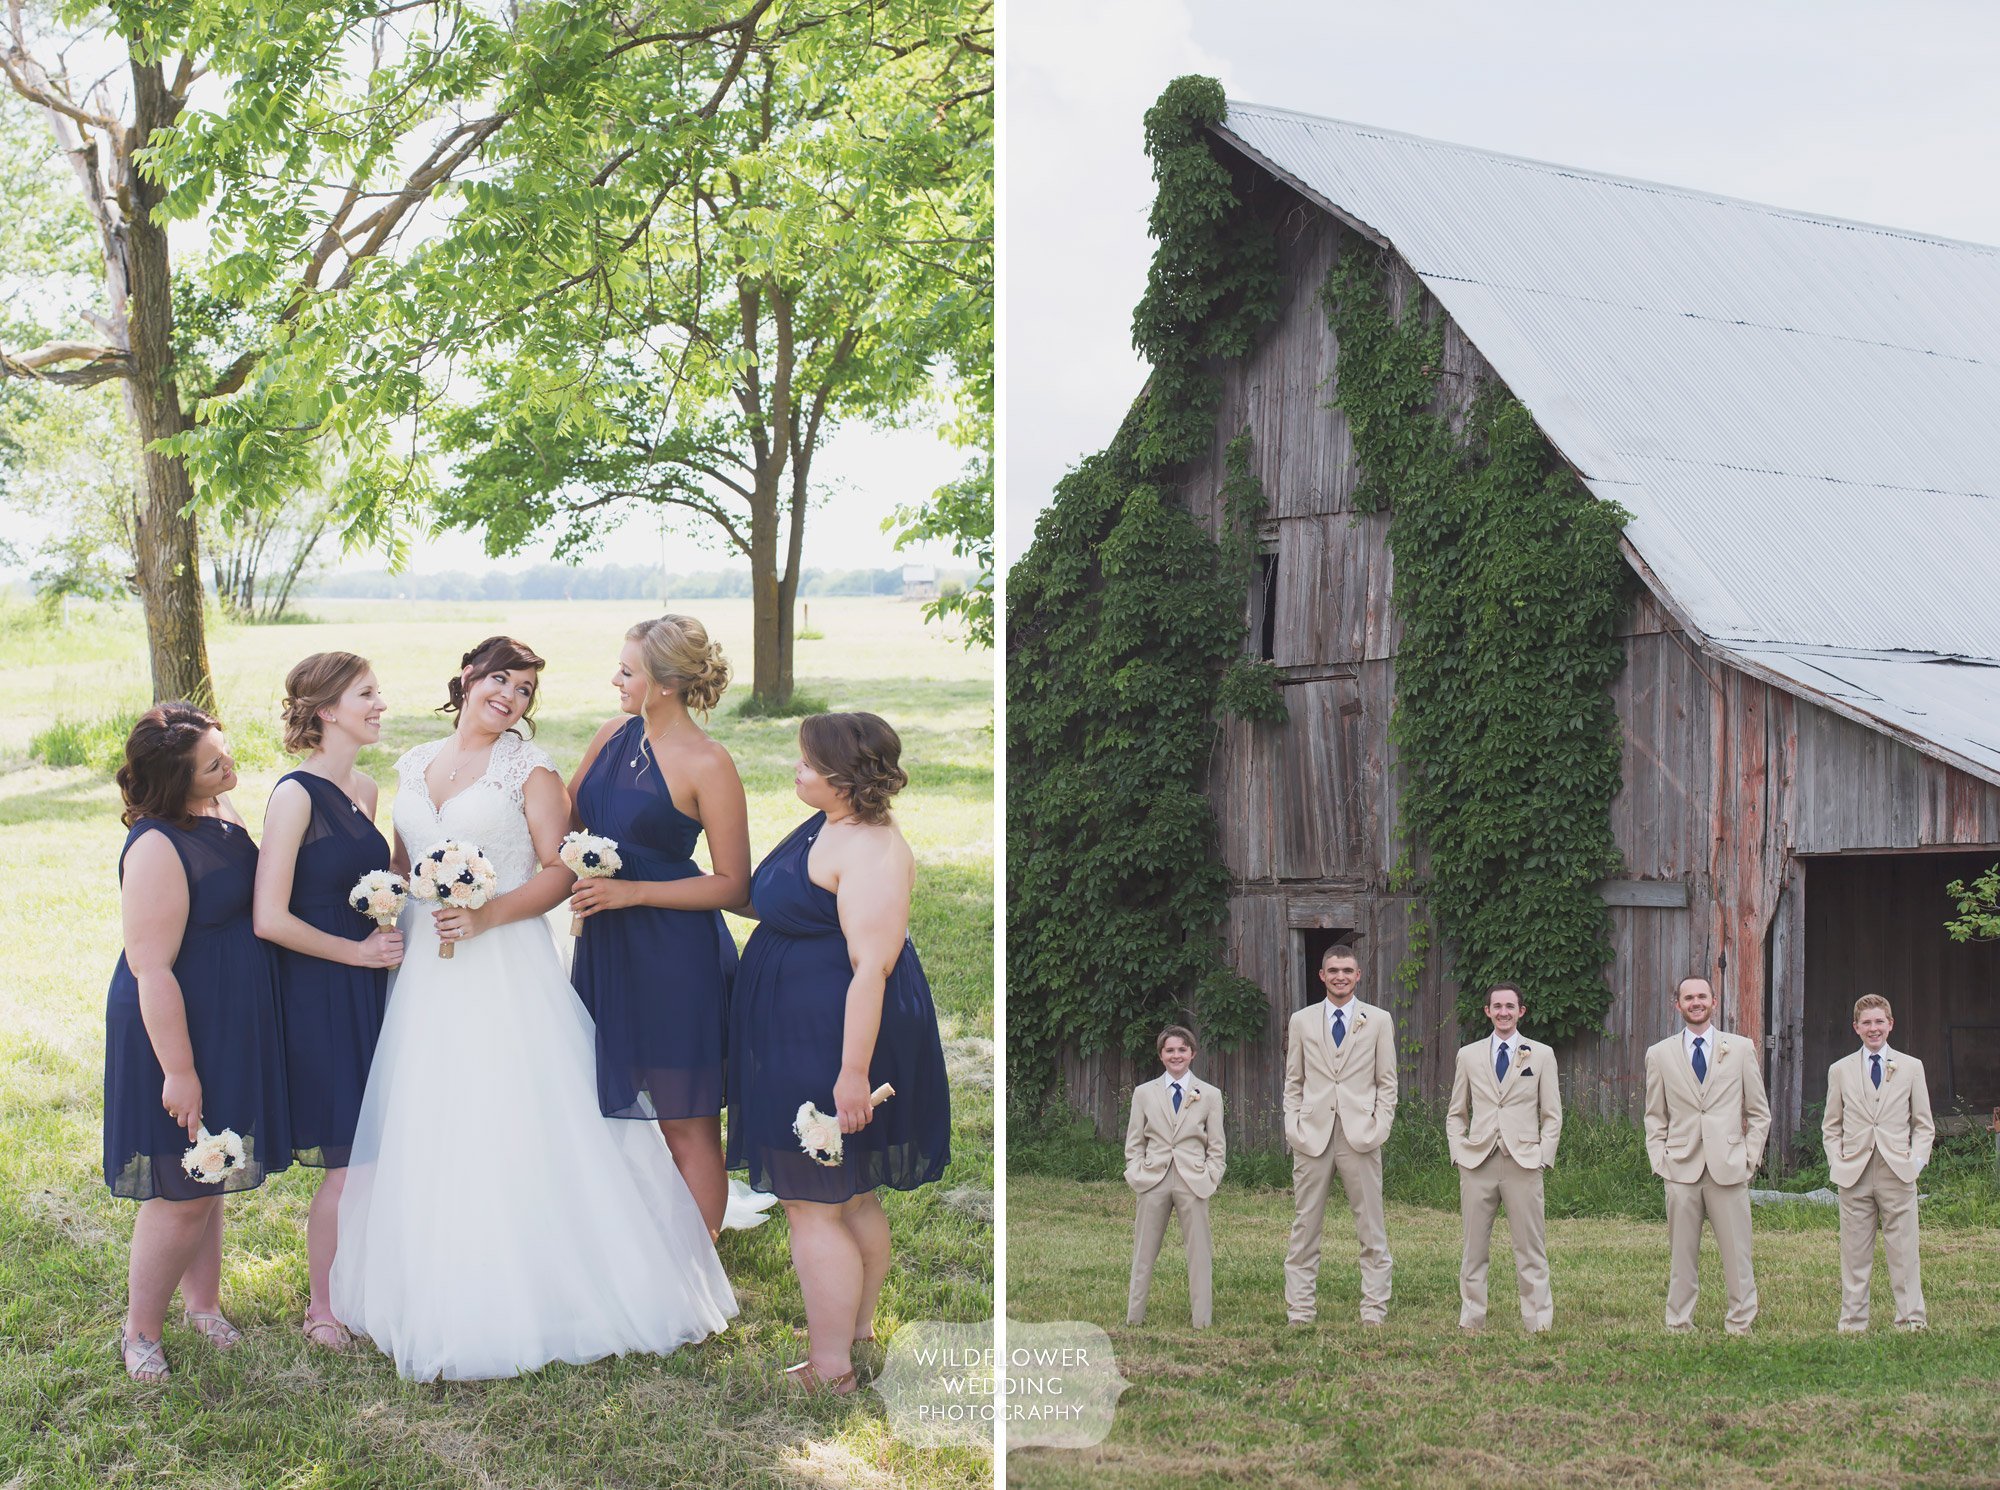 Wedding party photos outside of an ivy covered barn at Bradford Research Farm in Columbia, MO.